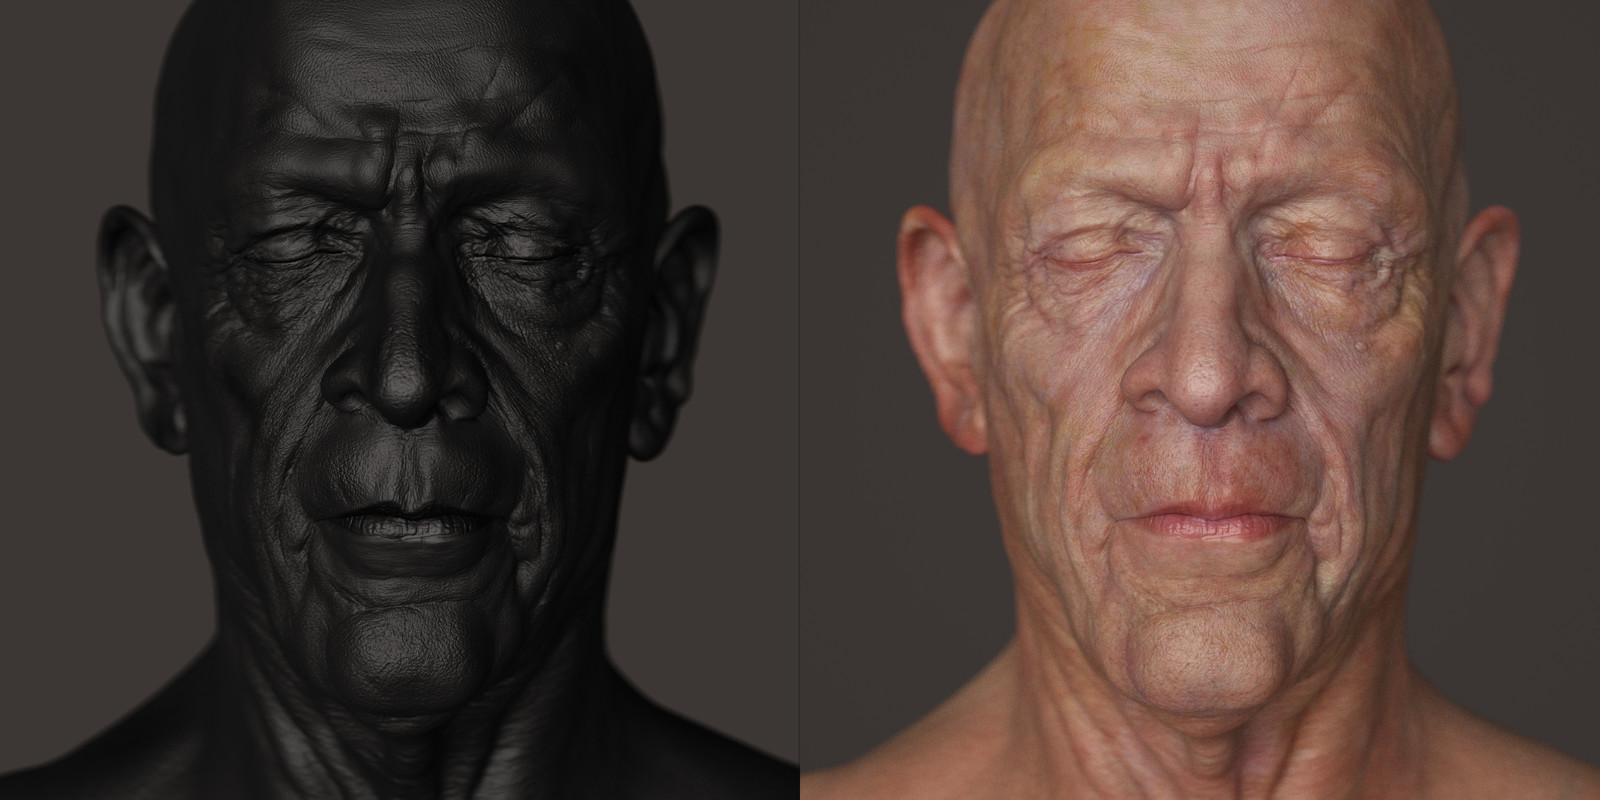 displacement map and skin shader tests